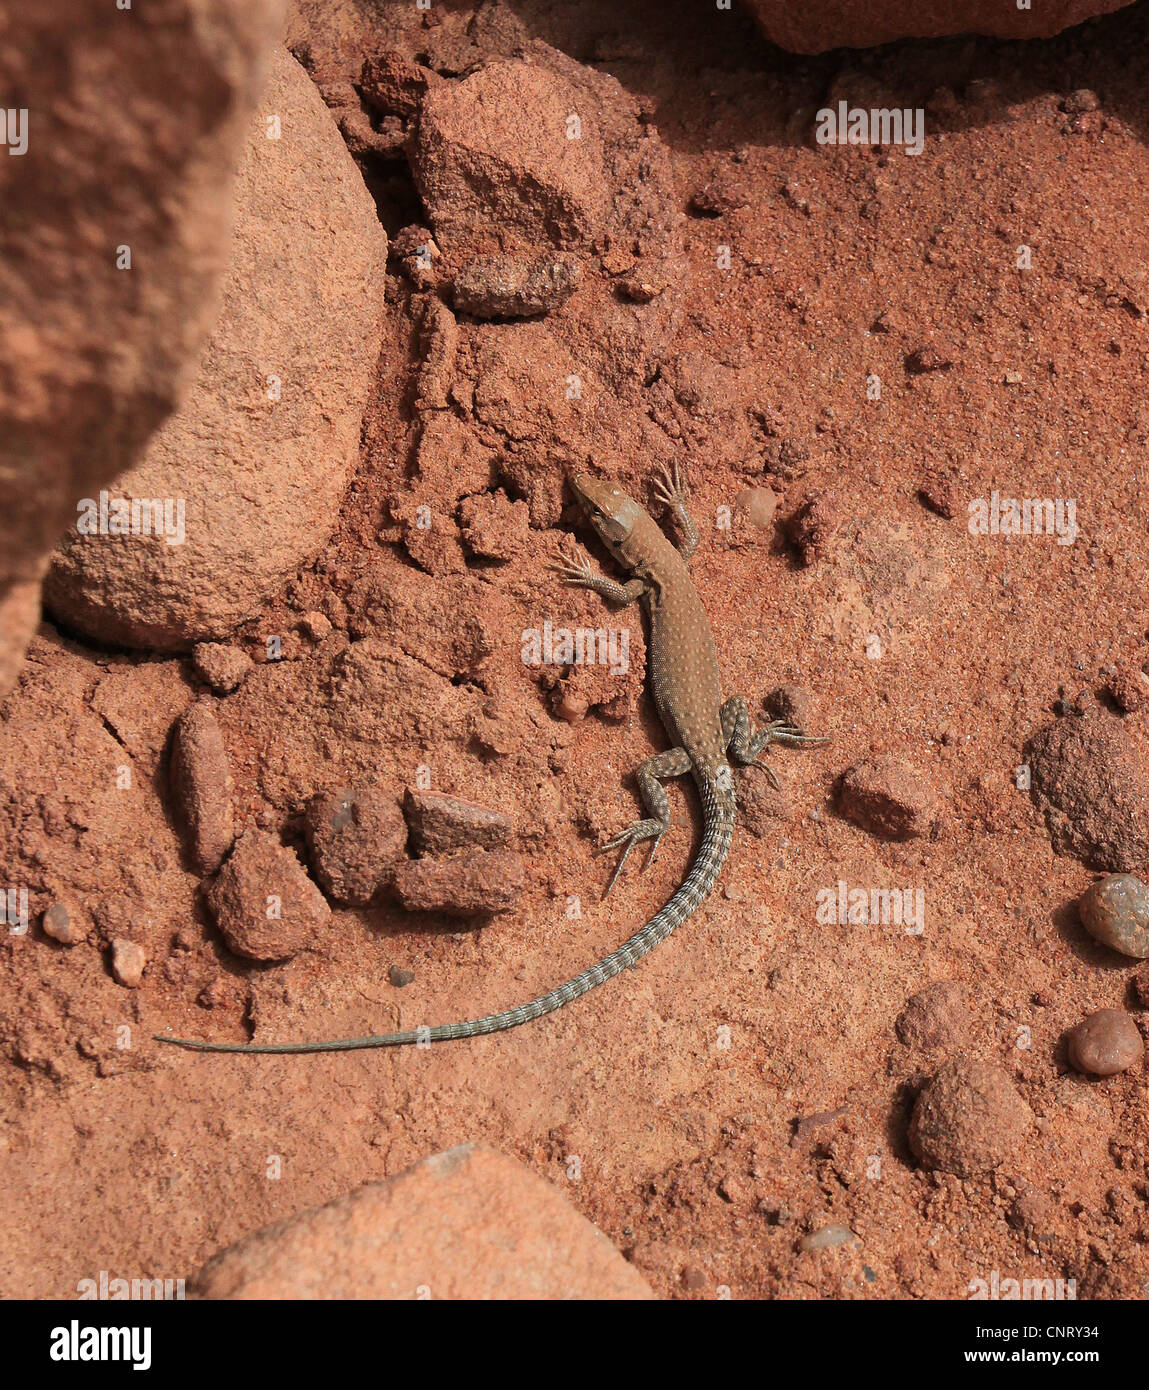 A Lacerta laevis lizard seen in the sandy and rocky desert of Wadi Rum (protected area) in Jordan. Stock Photo